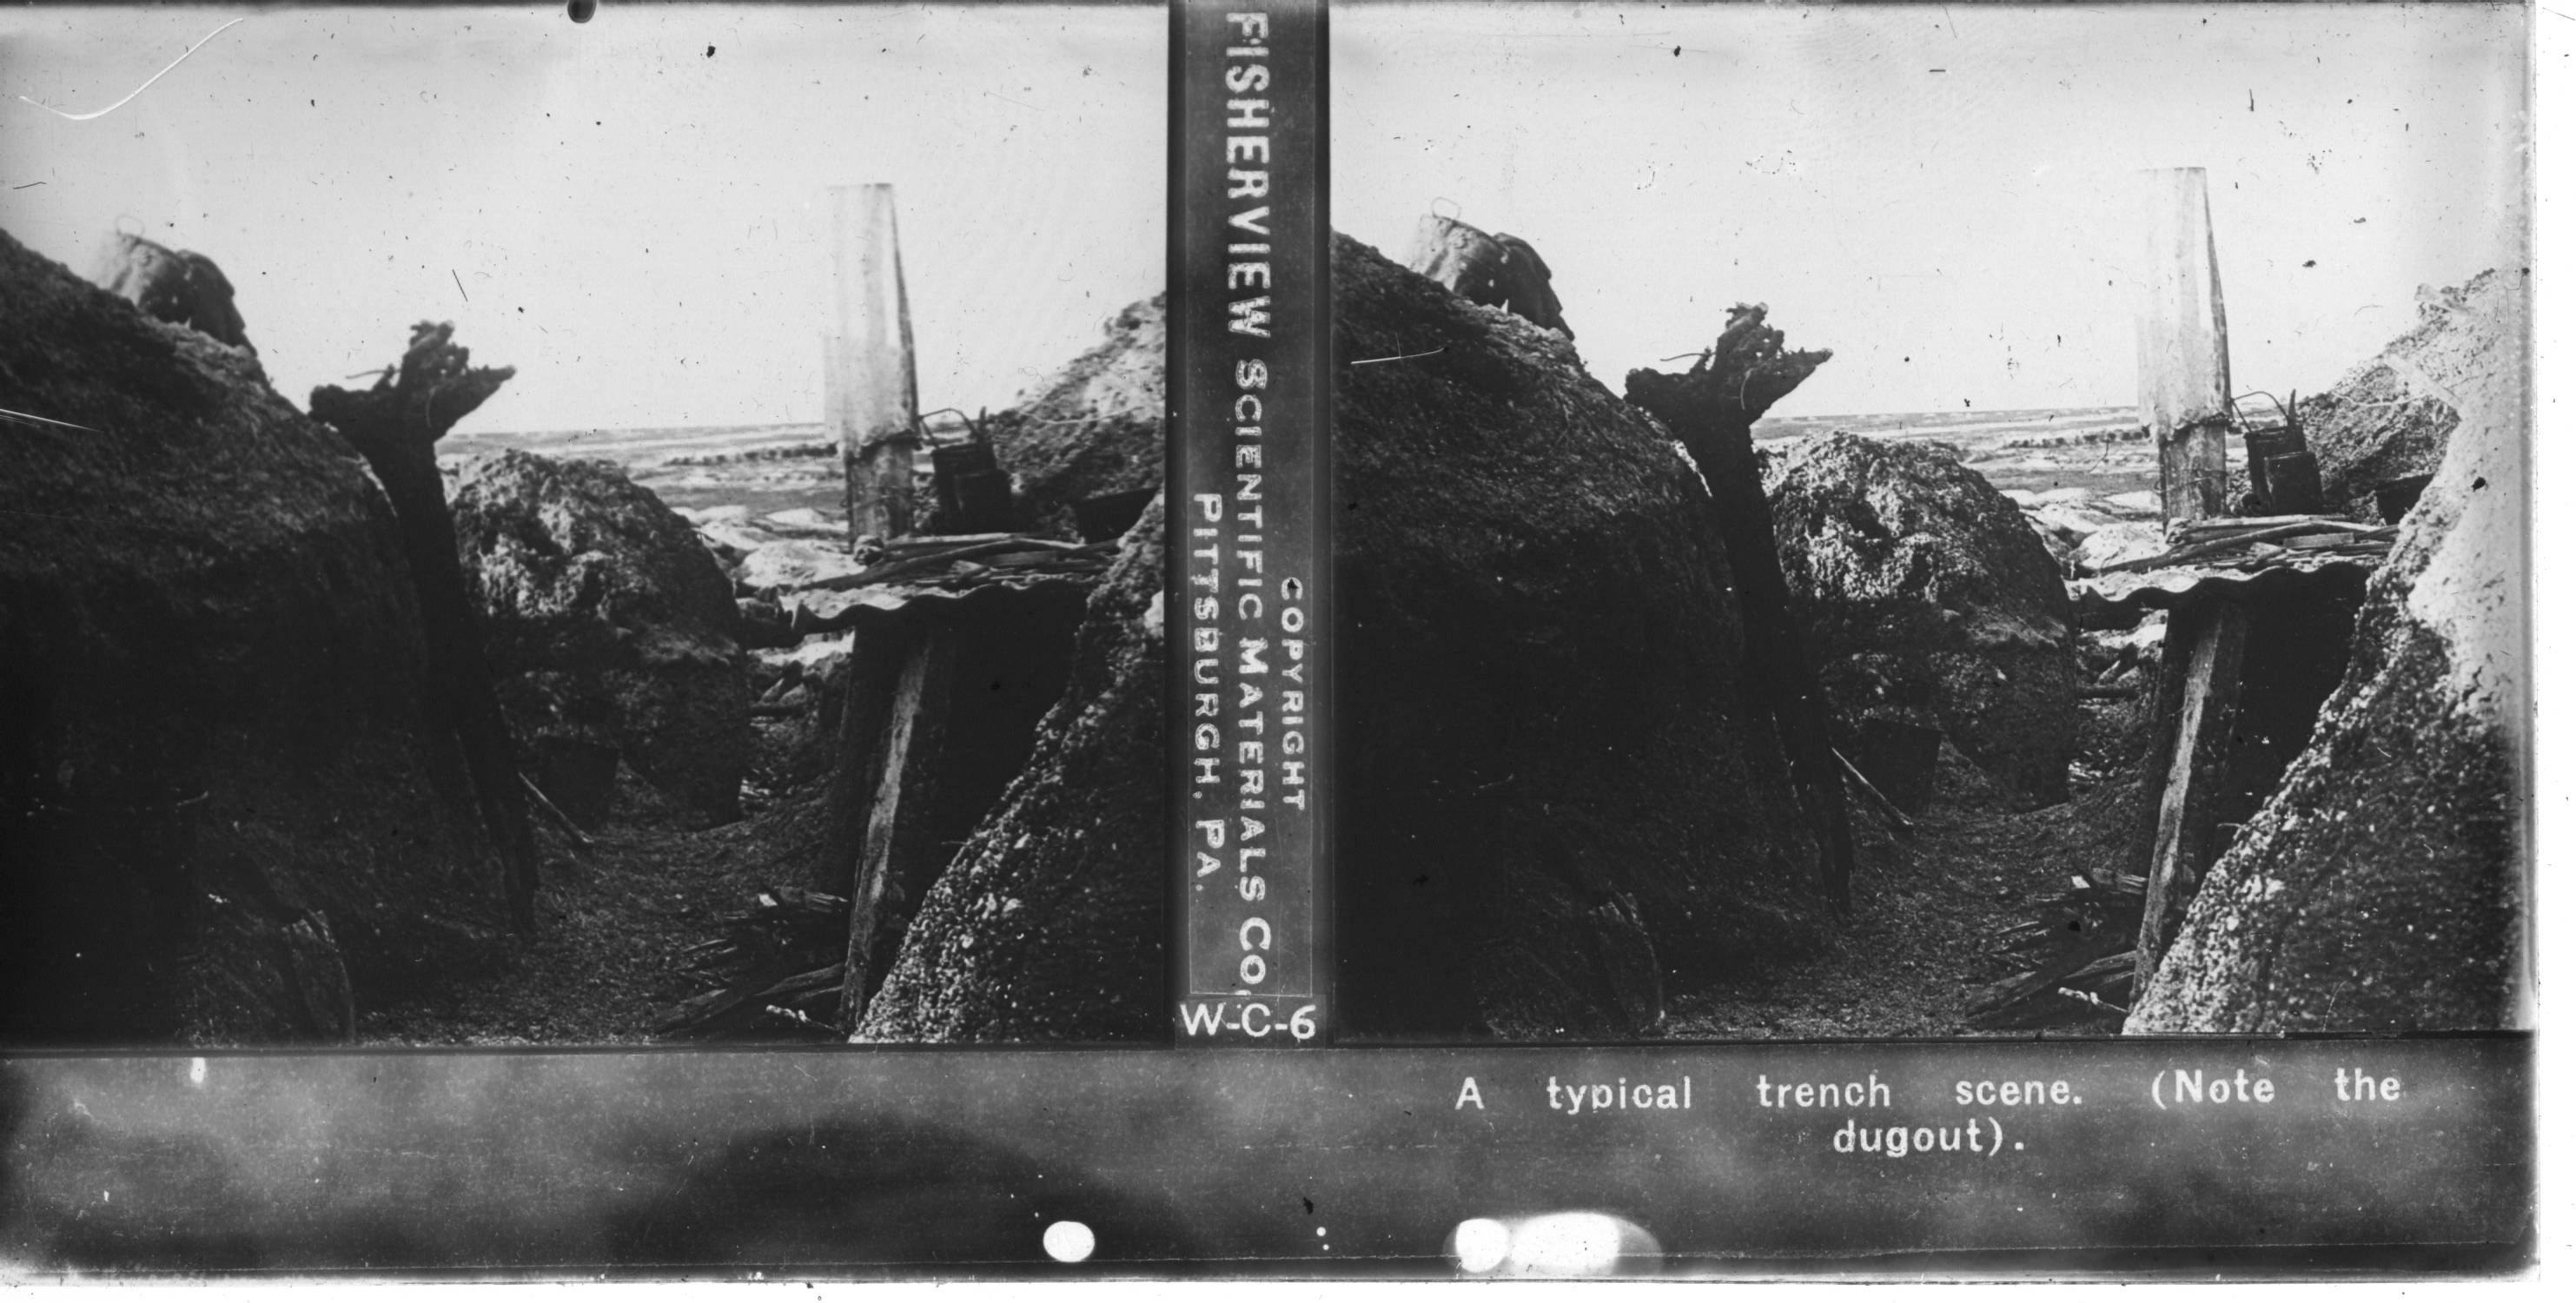 A typical trench scene. (Note the dugout)